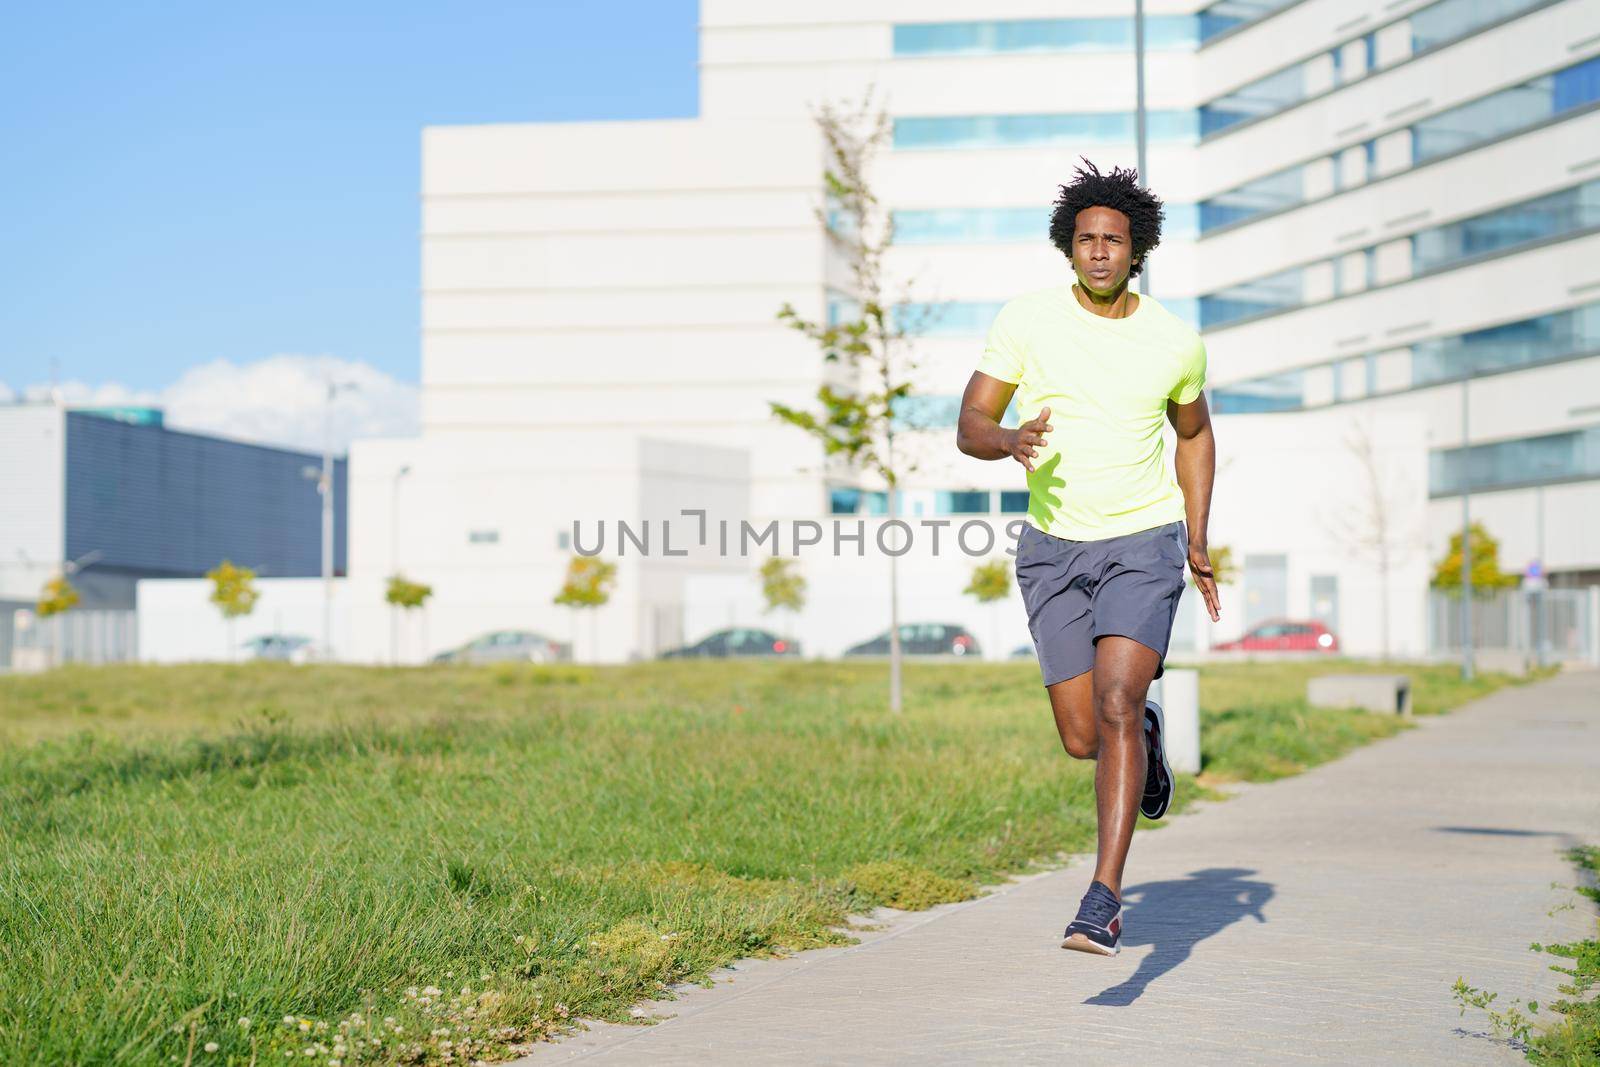 Black athletic man, afro hairstyle, running in an urban park. Young male exercising in urban background.